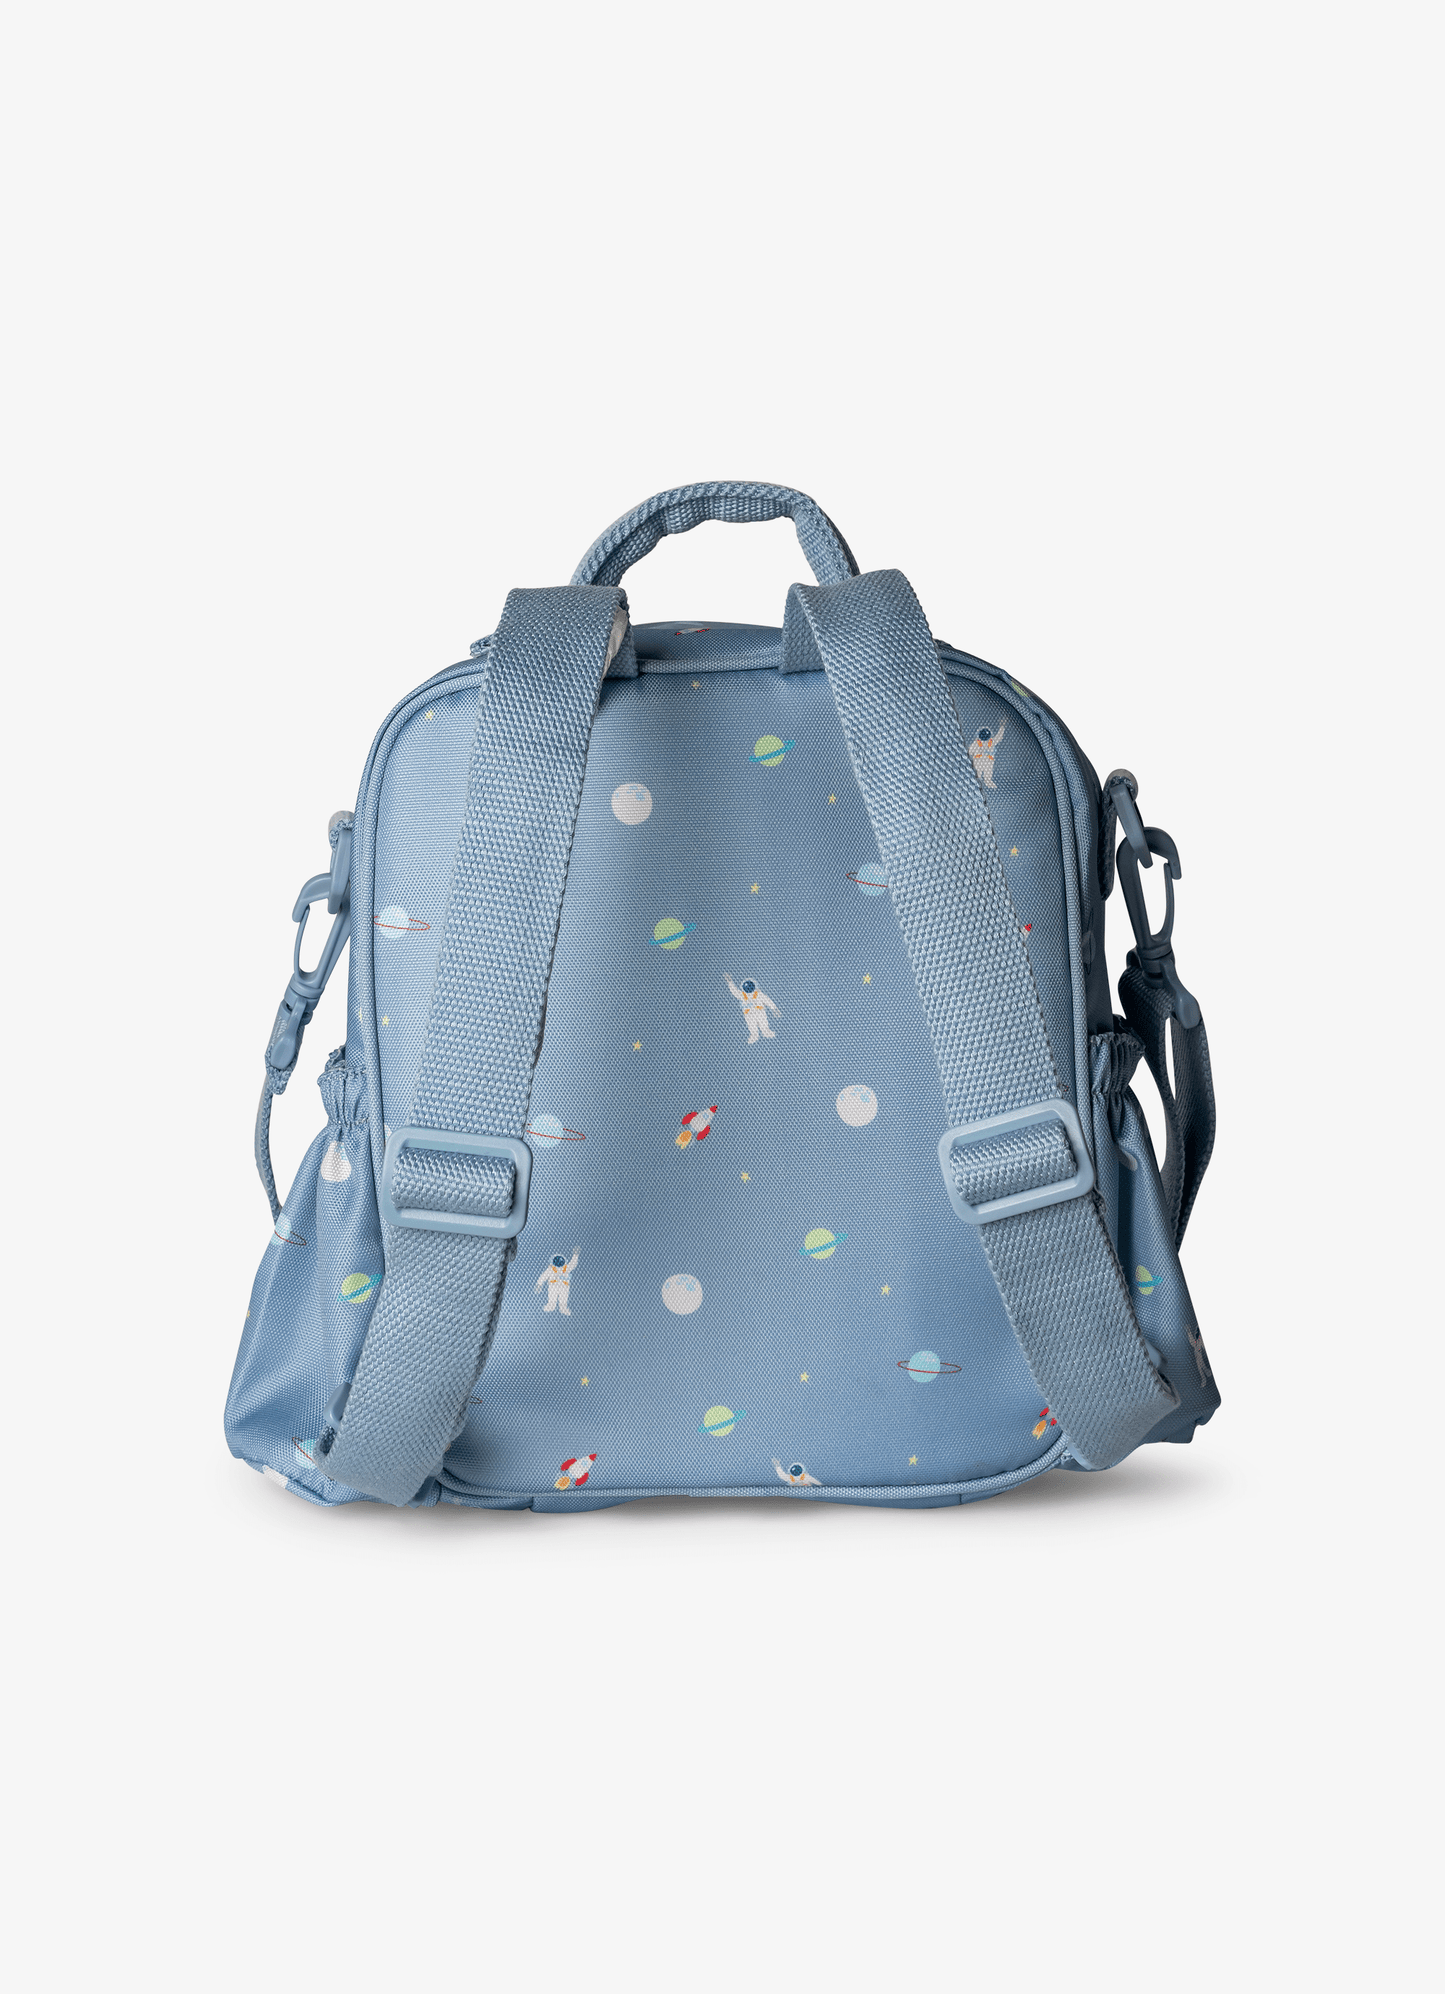 Insulated Lunch Bag Backpack - Spaceship Dusty Blue